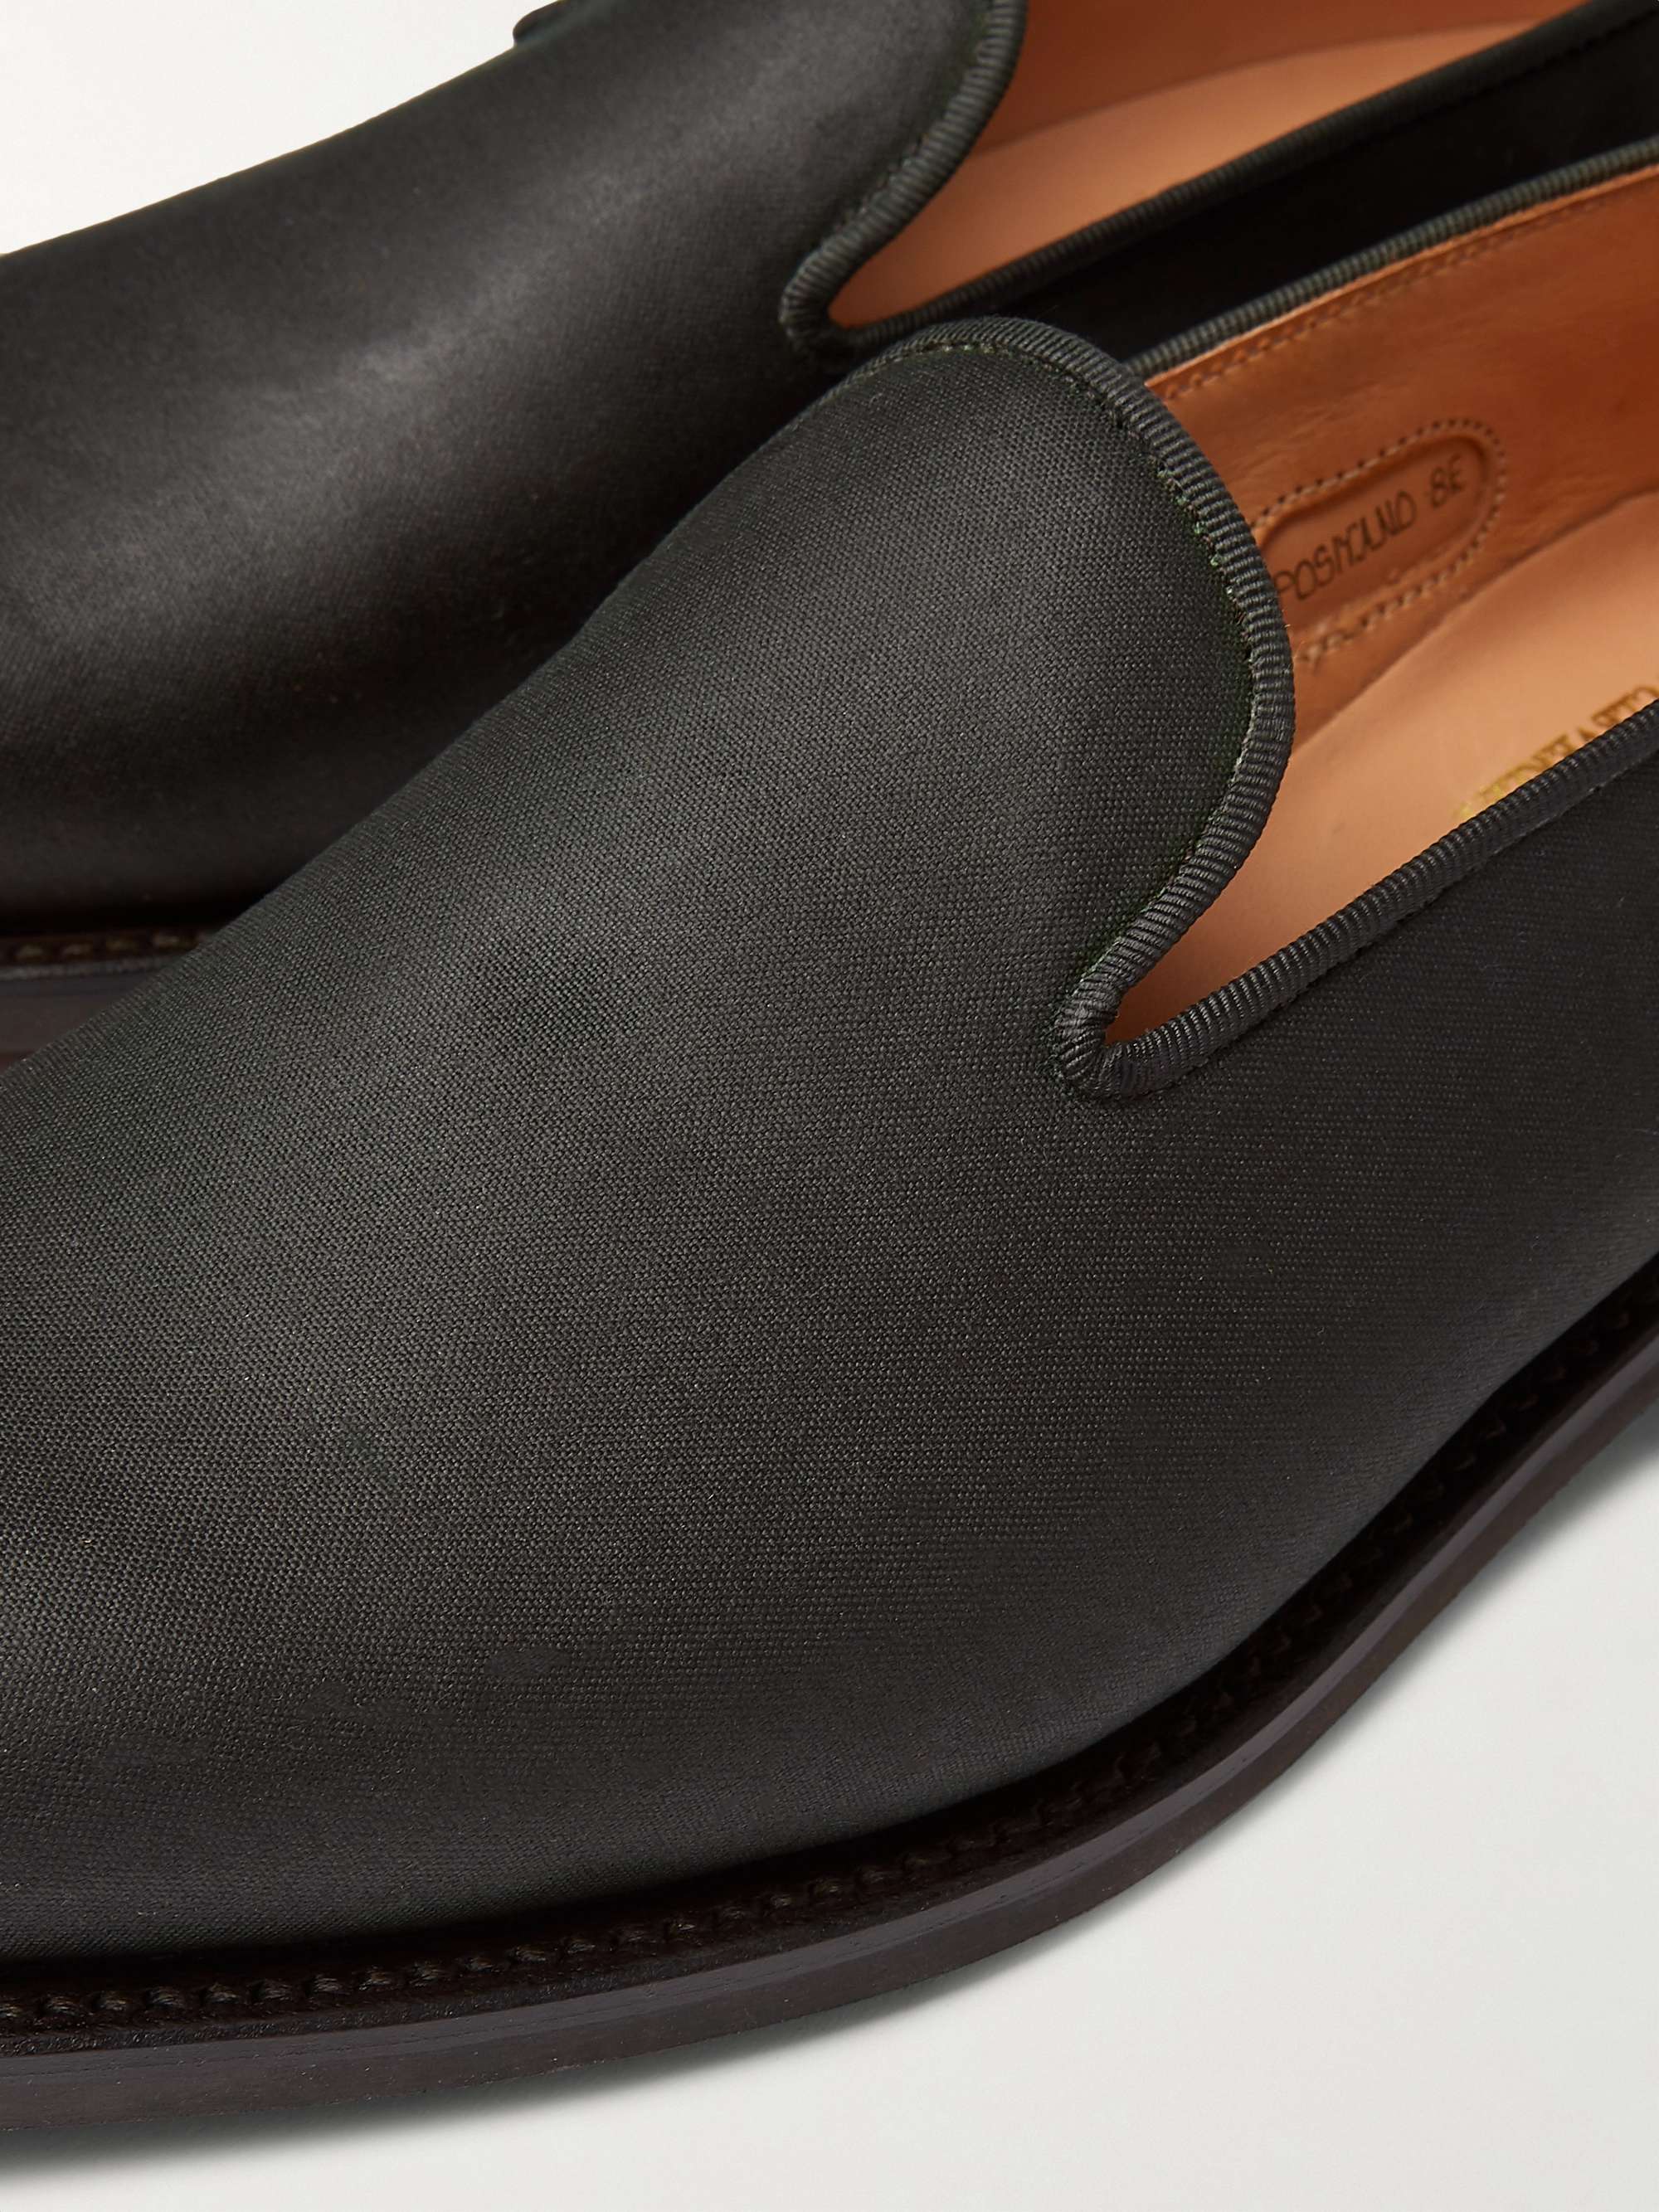 GEORGE CLEVERLEY Positano Waxed-Cotton Loafers